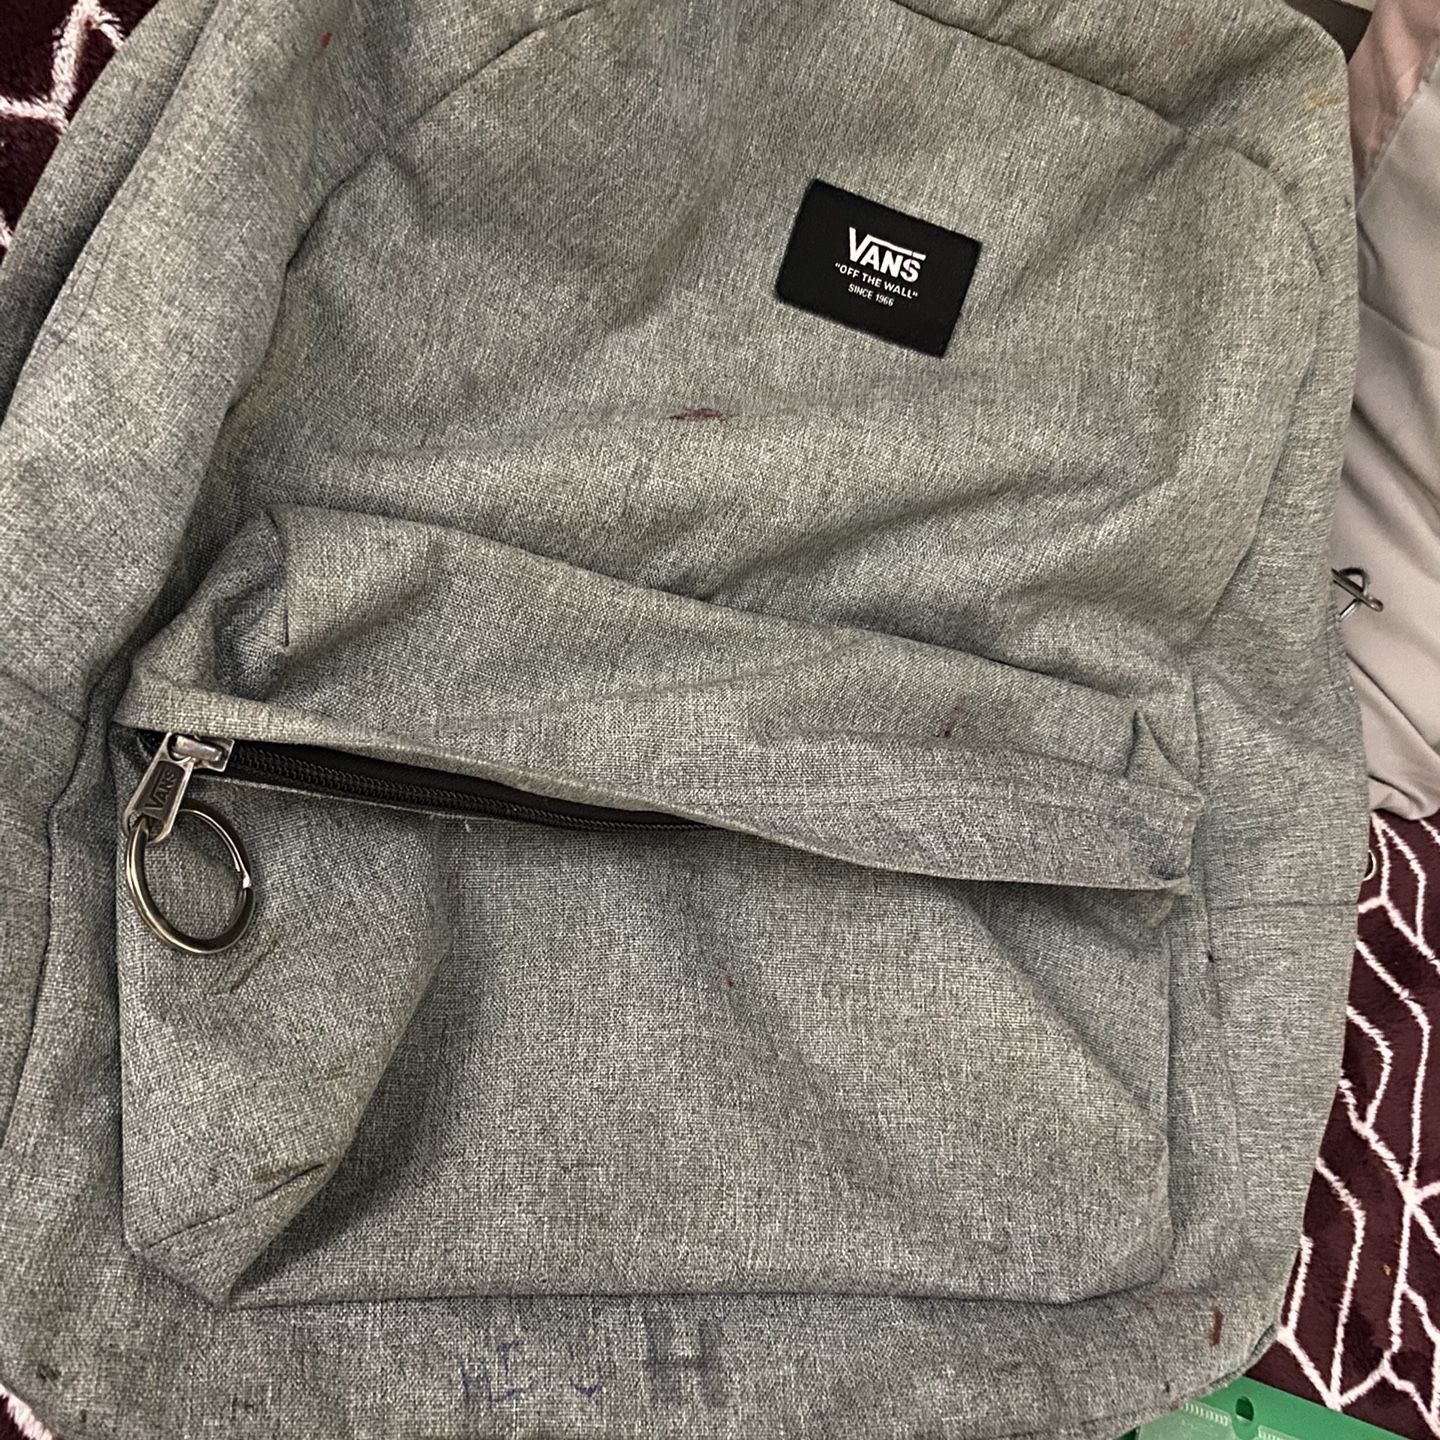 Cactus jack backpack brand new for Sale in Ontario, CA - OfferUp